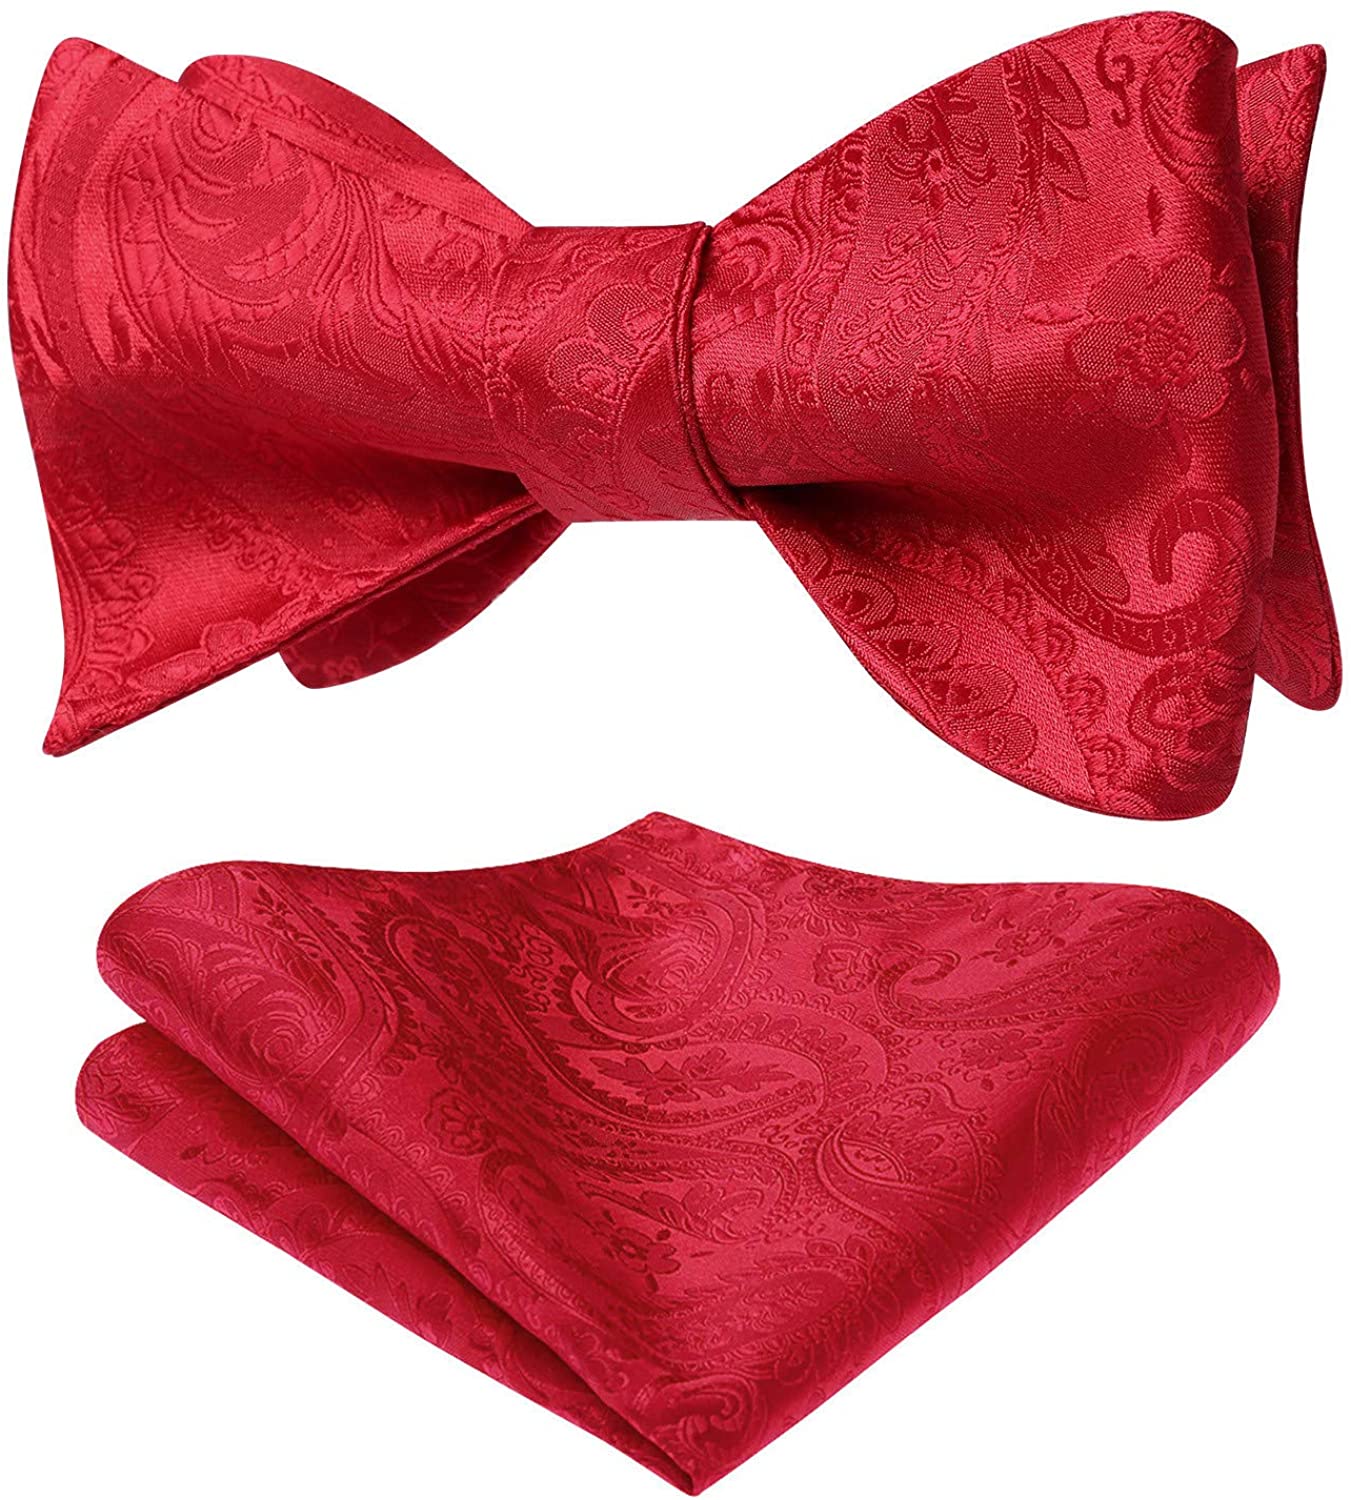 Solid Untied Bow Ties for Men Classic Satin Self Tie Bowtie Hanky Set by HISDERN